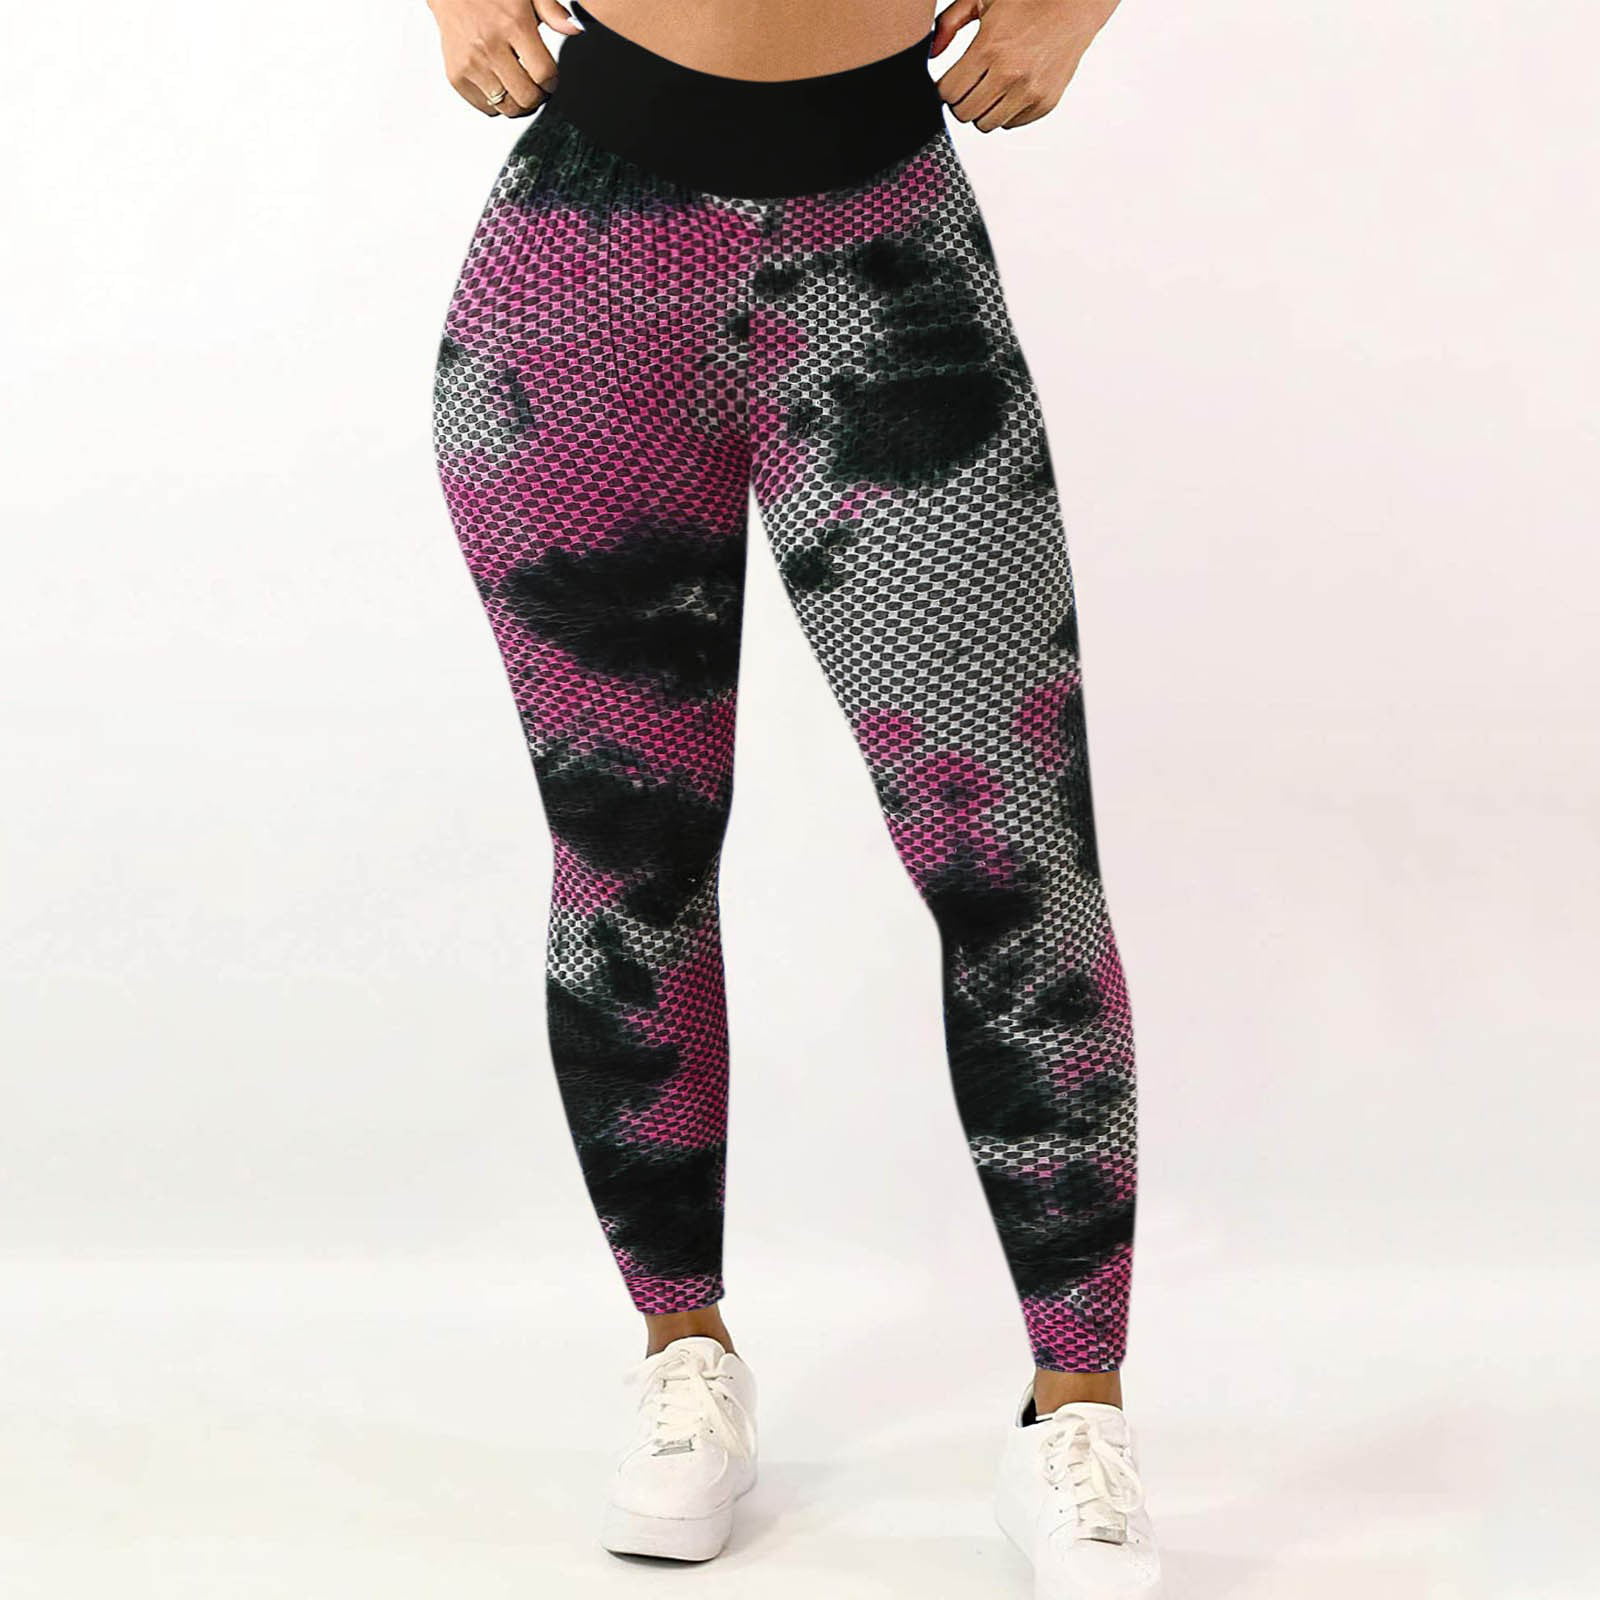 LEEy-World Workout Leggings for Women Wo Black Flare Yoga Pants, Crossover  High Waisted Casual Bootcut Leggings Hot Pink,XL